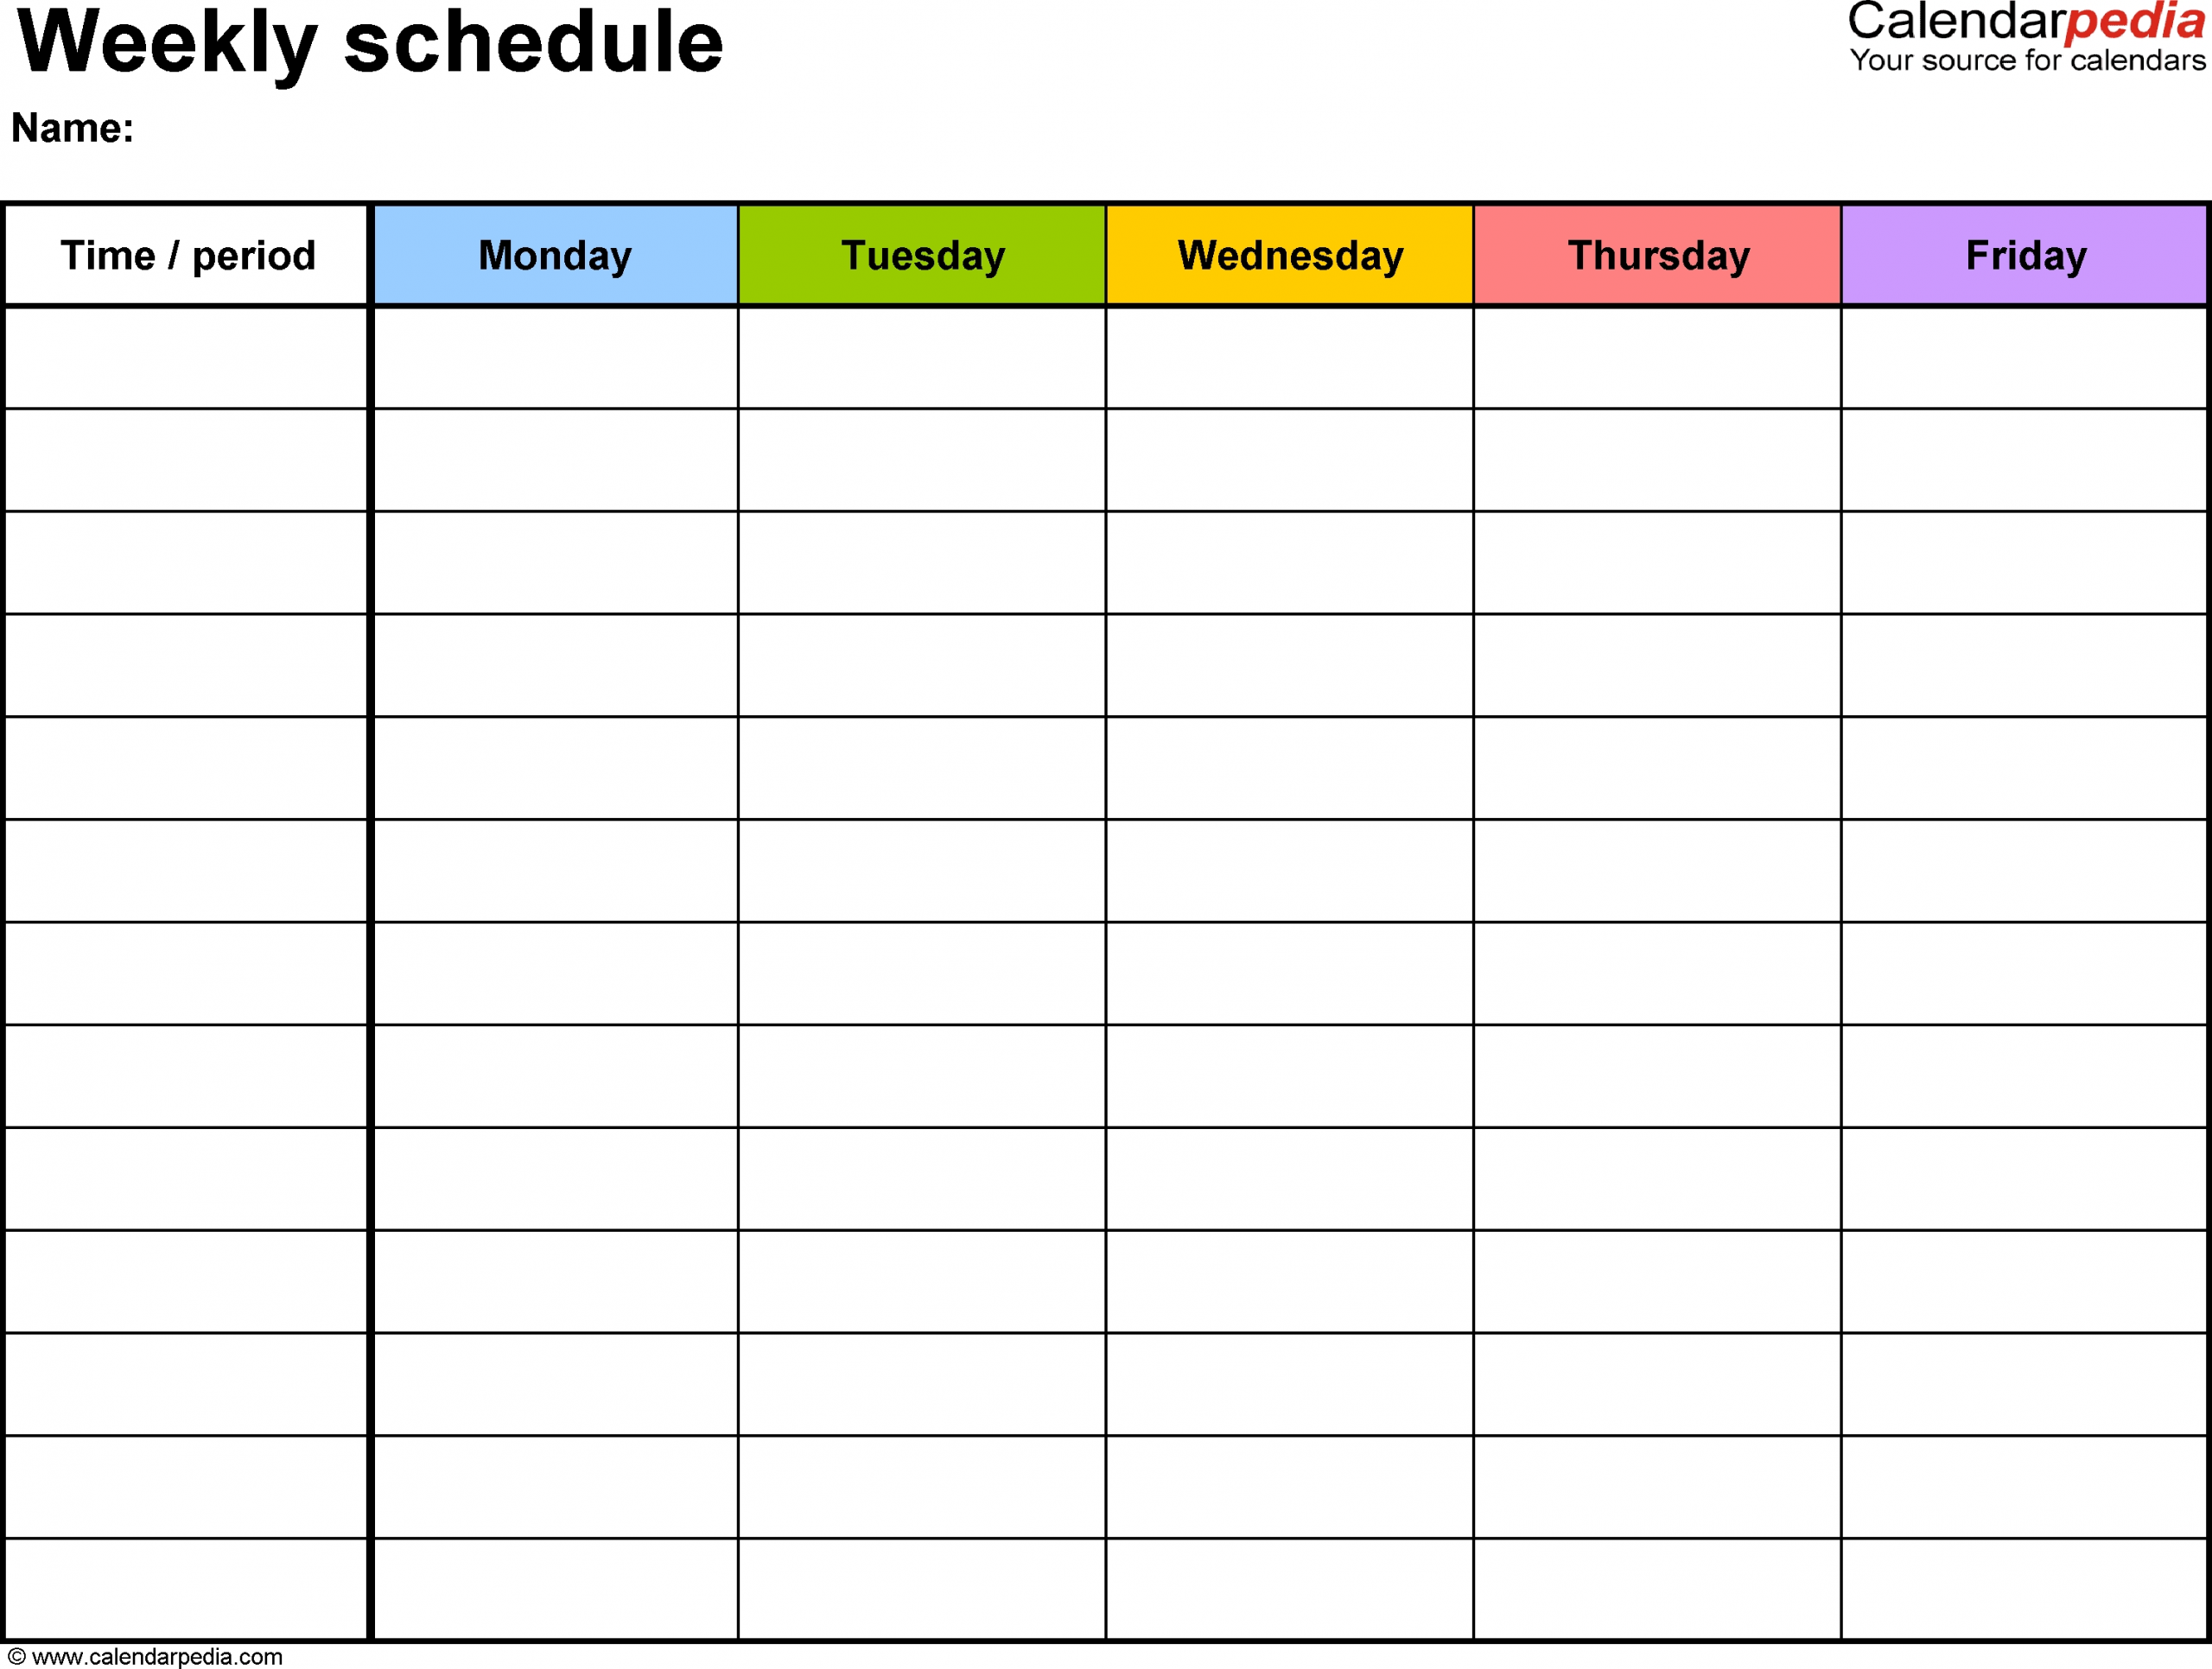 Free Weekly Schedule Templates For Word - 18 Templates within Monday Through Friday Schedule Template